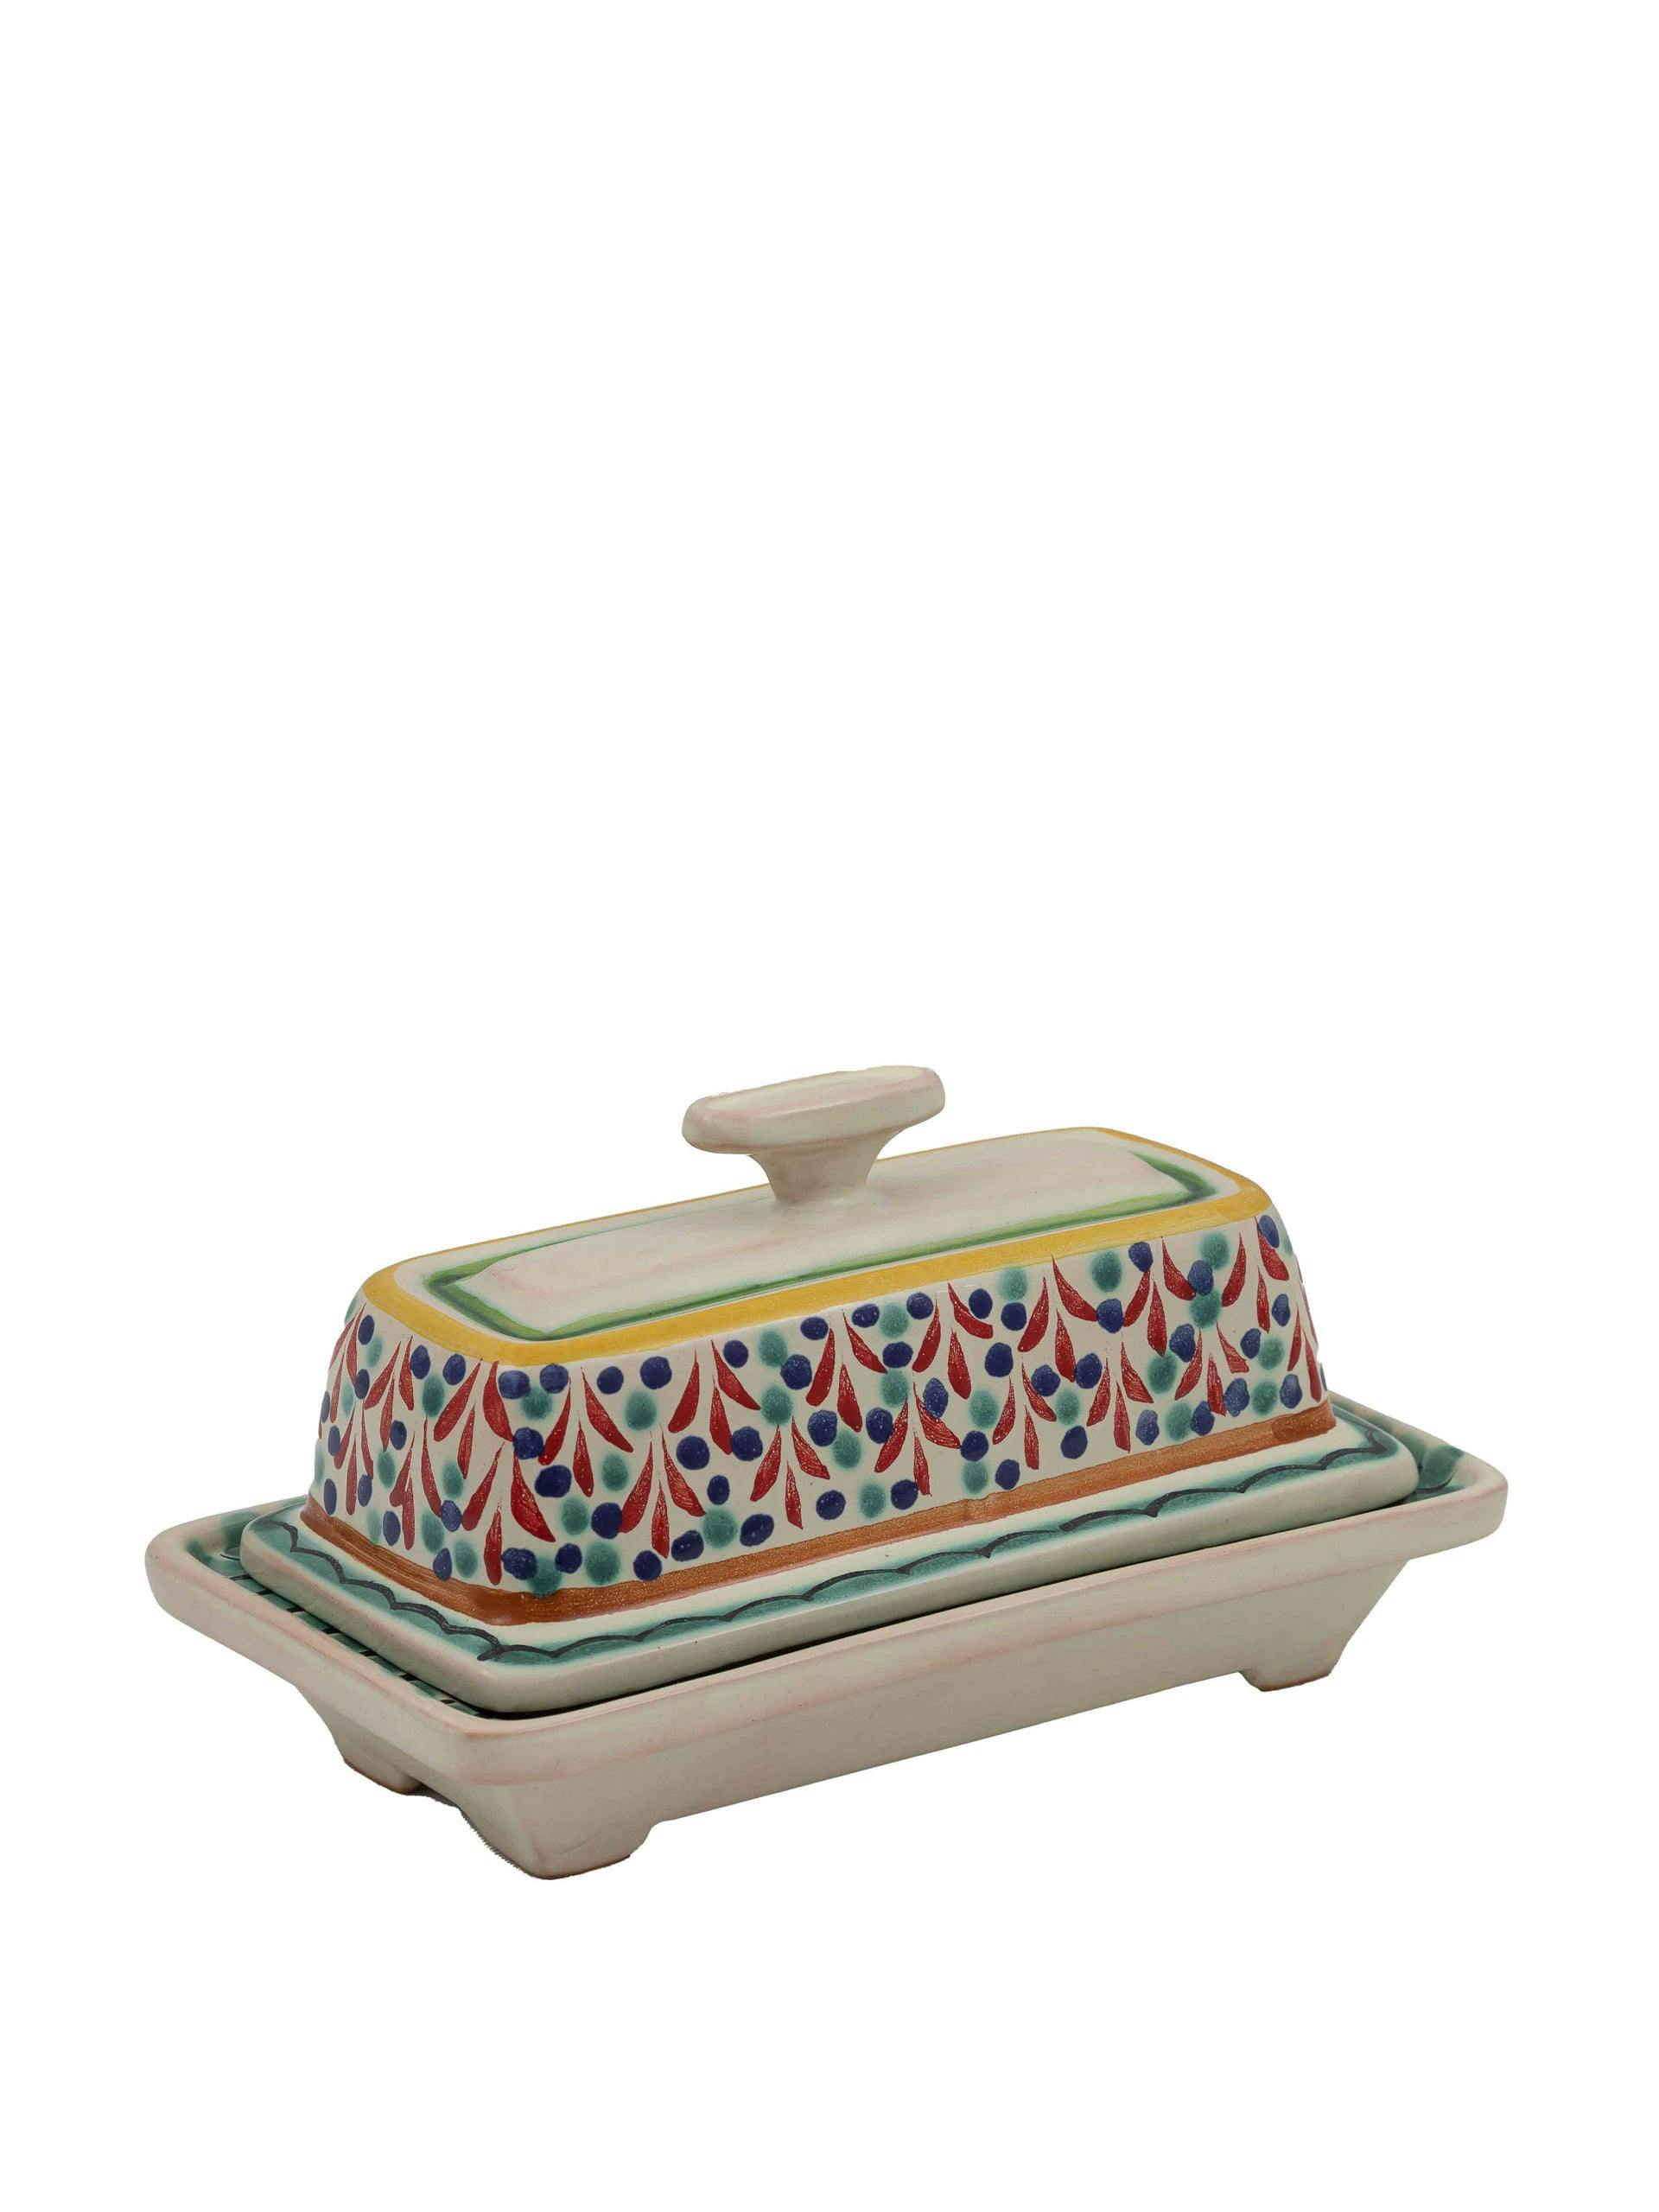 Red and aqua butter dish